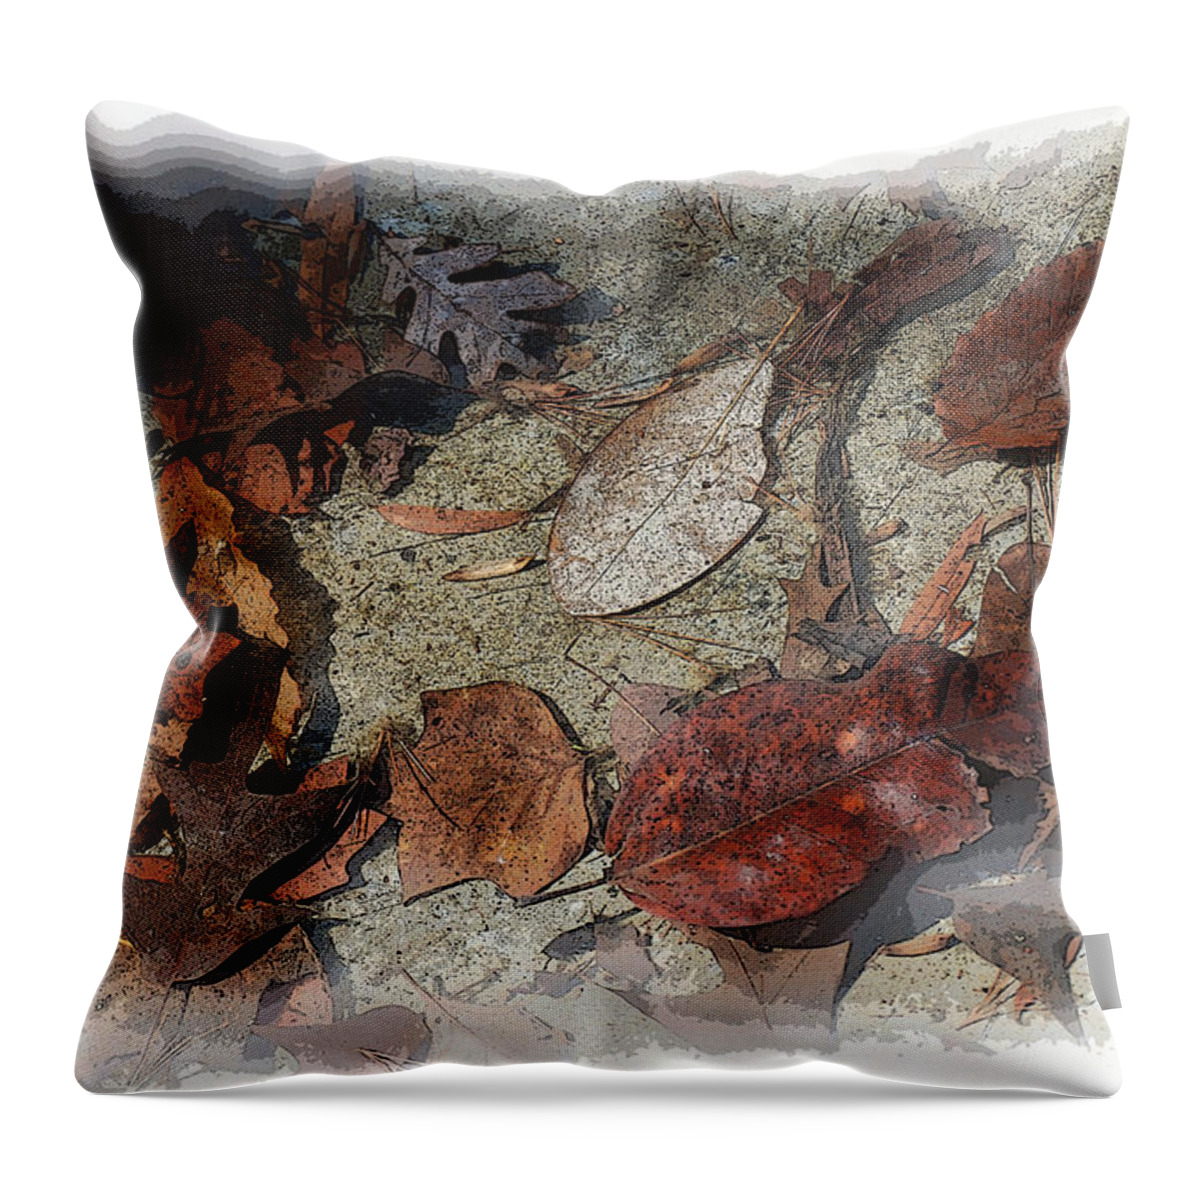 Fall Leaves Throw Pillow featuring the photograph Falling Leaves by Don Wright